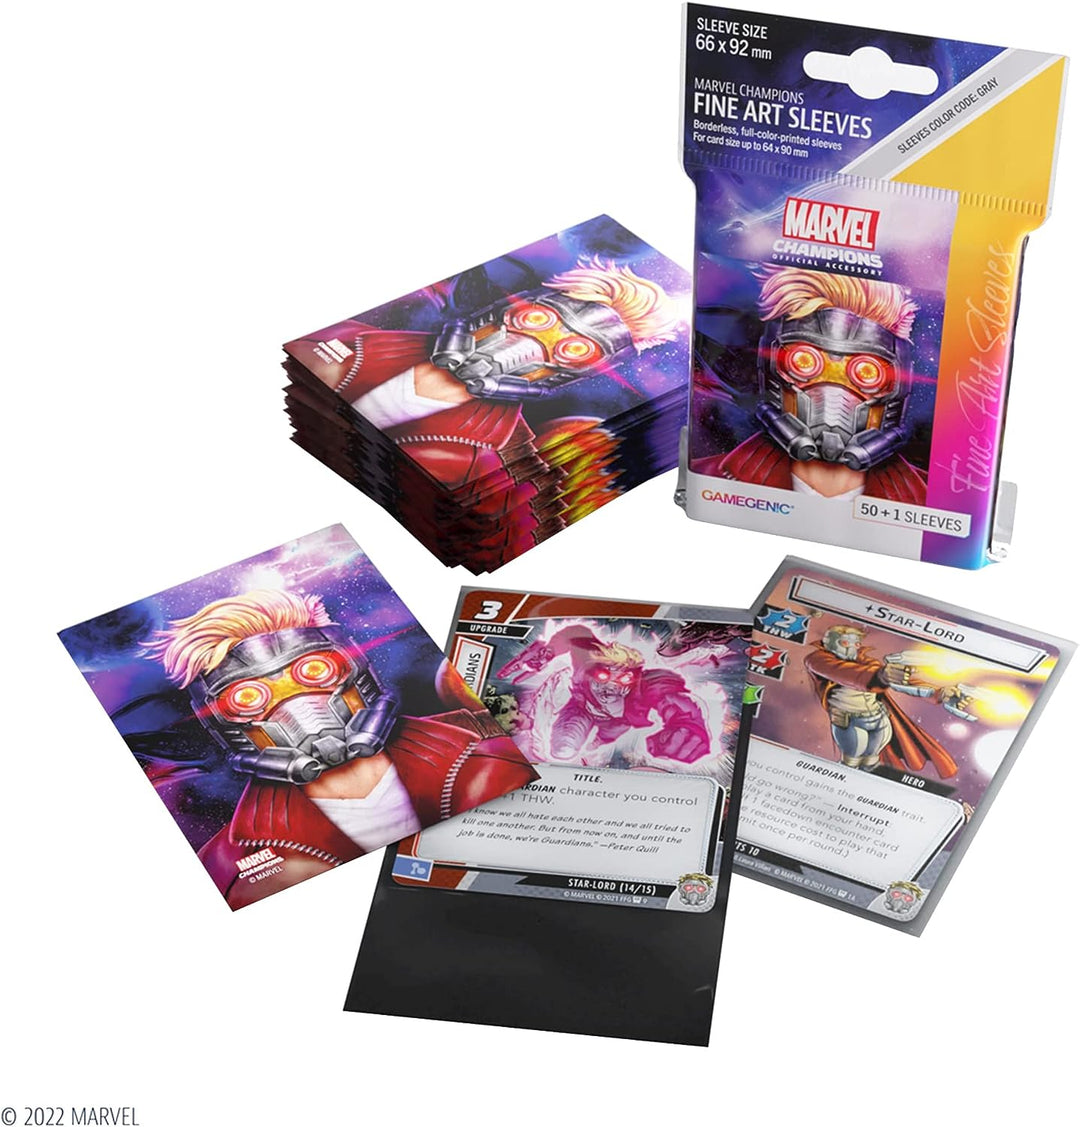 Gamegenic Marvel Champions The Card Game Official Star-Lord Fine Art Sleeves